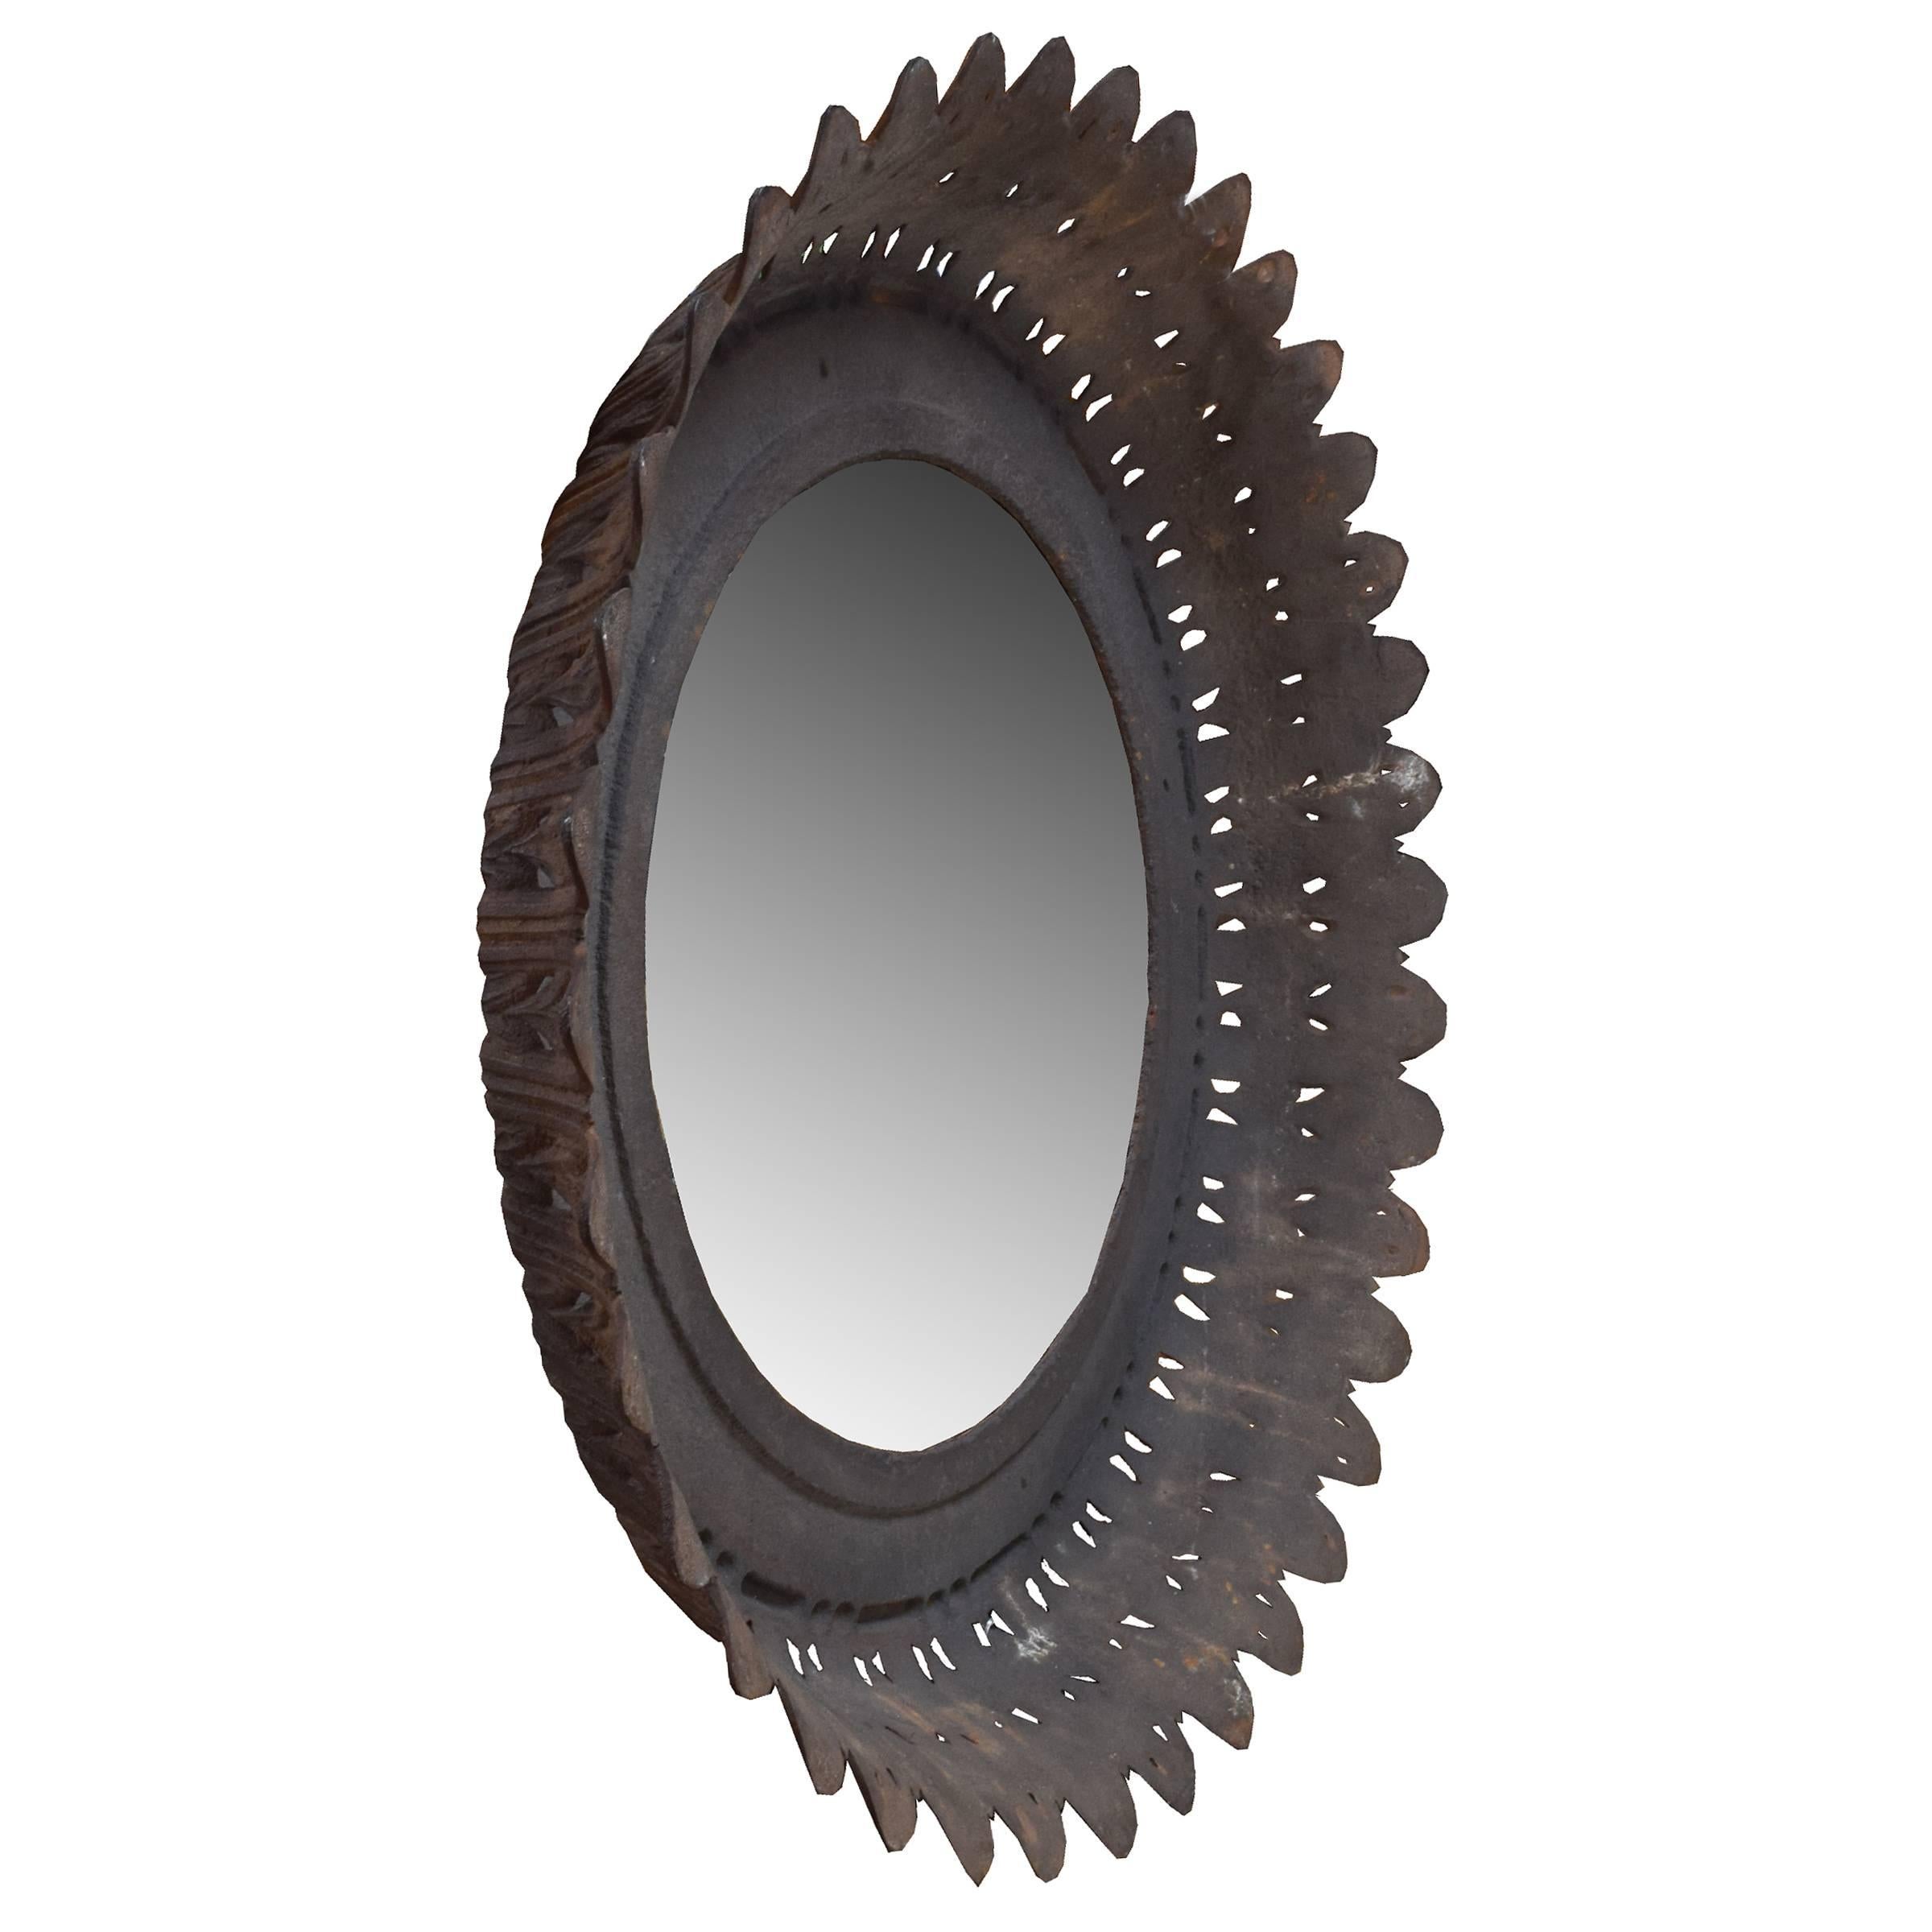 A French cast iron fountain fragment with a leaf design, circa 1880, with a mounted mirror.